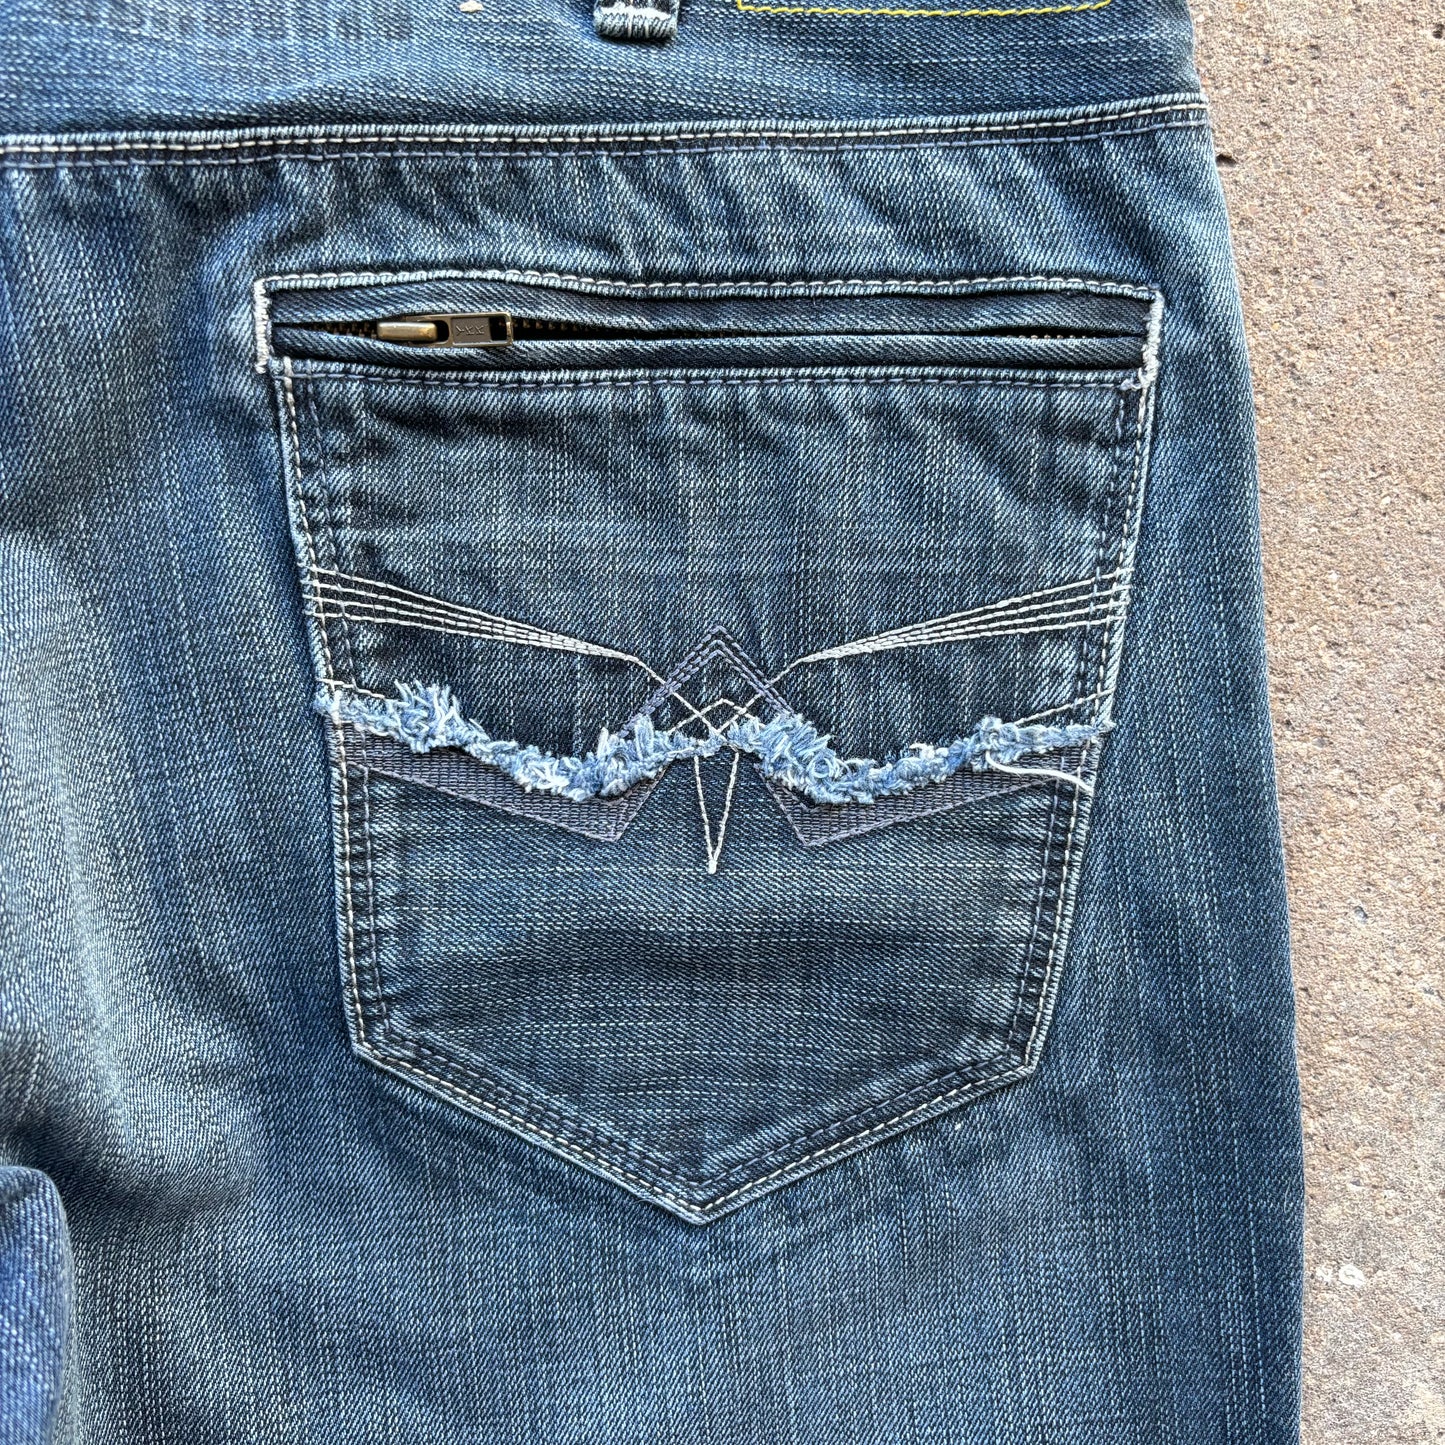 DKNY Grunge Style Jeans with Back Pocket Stitching